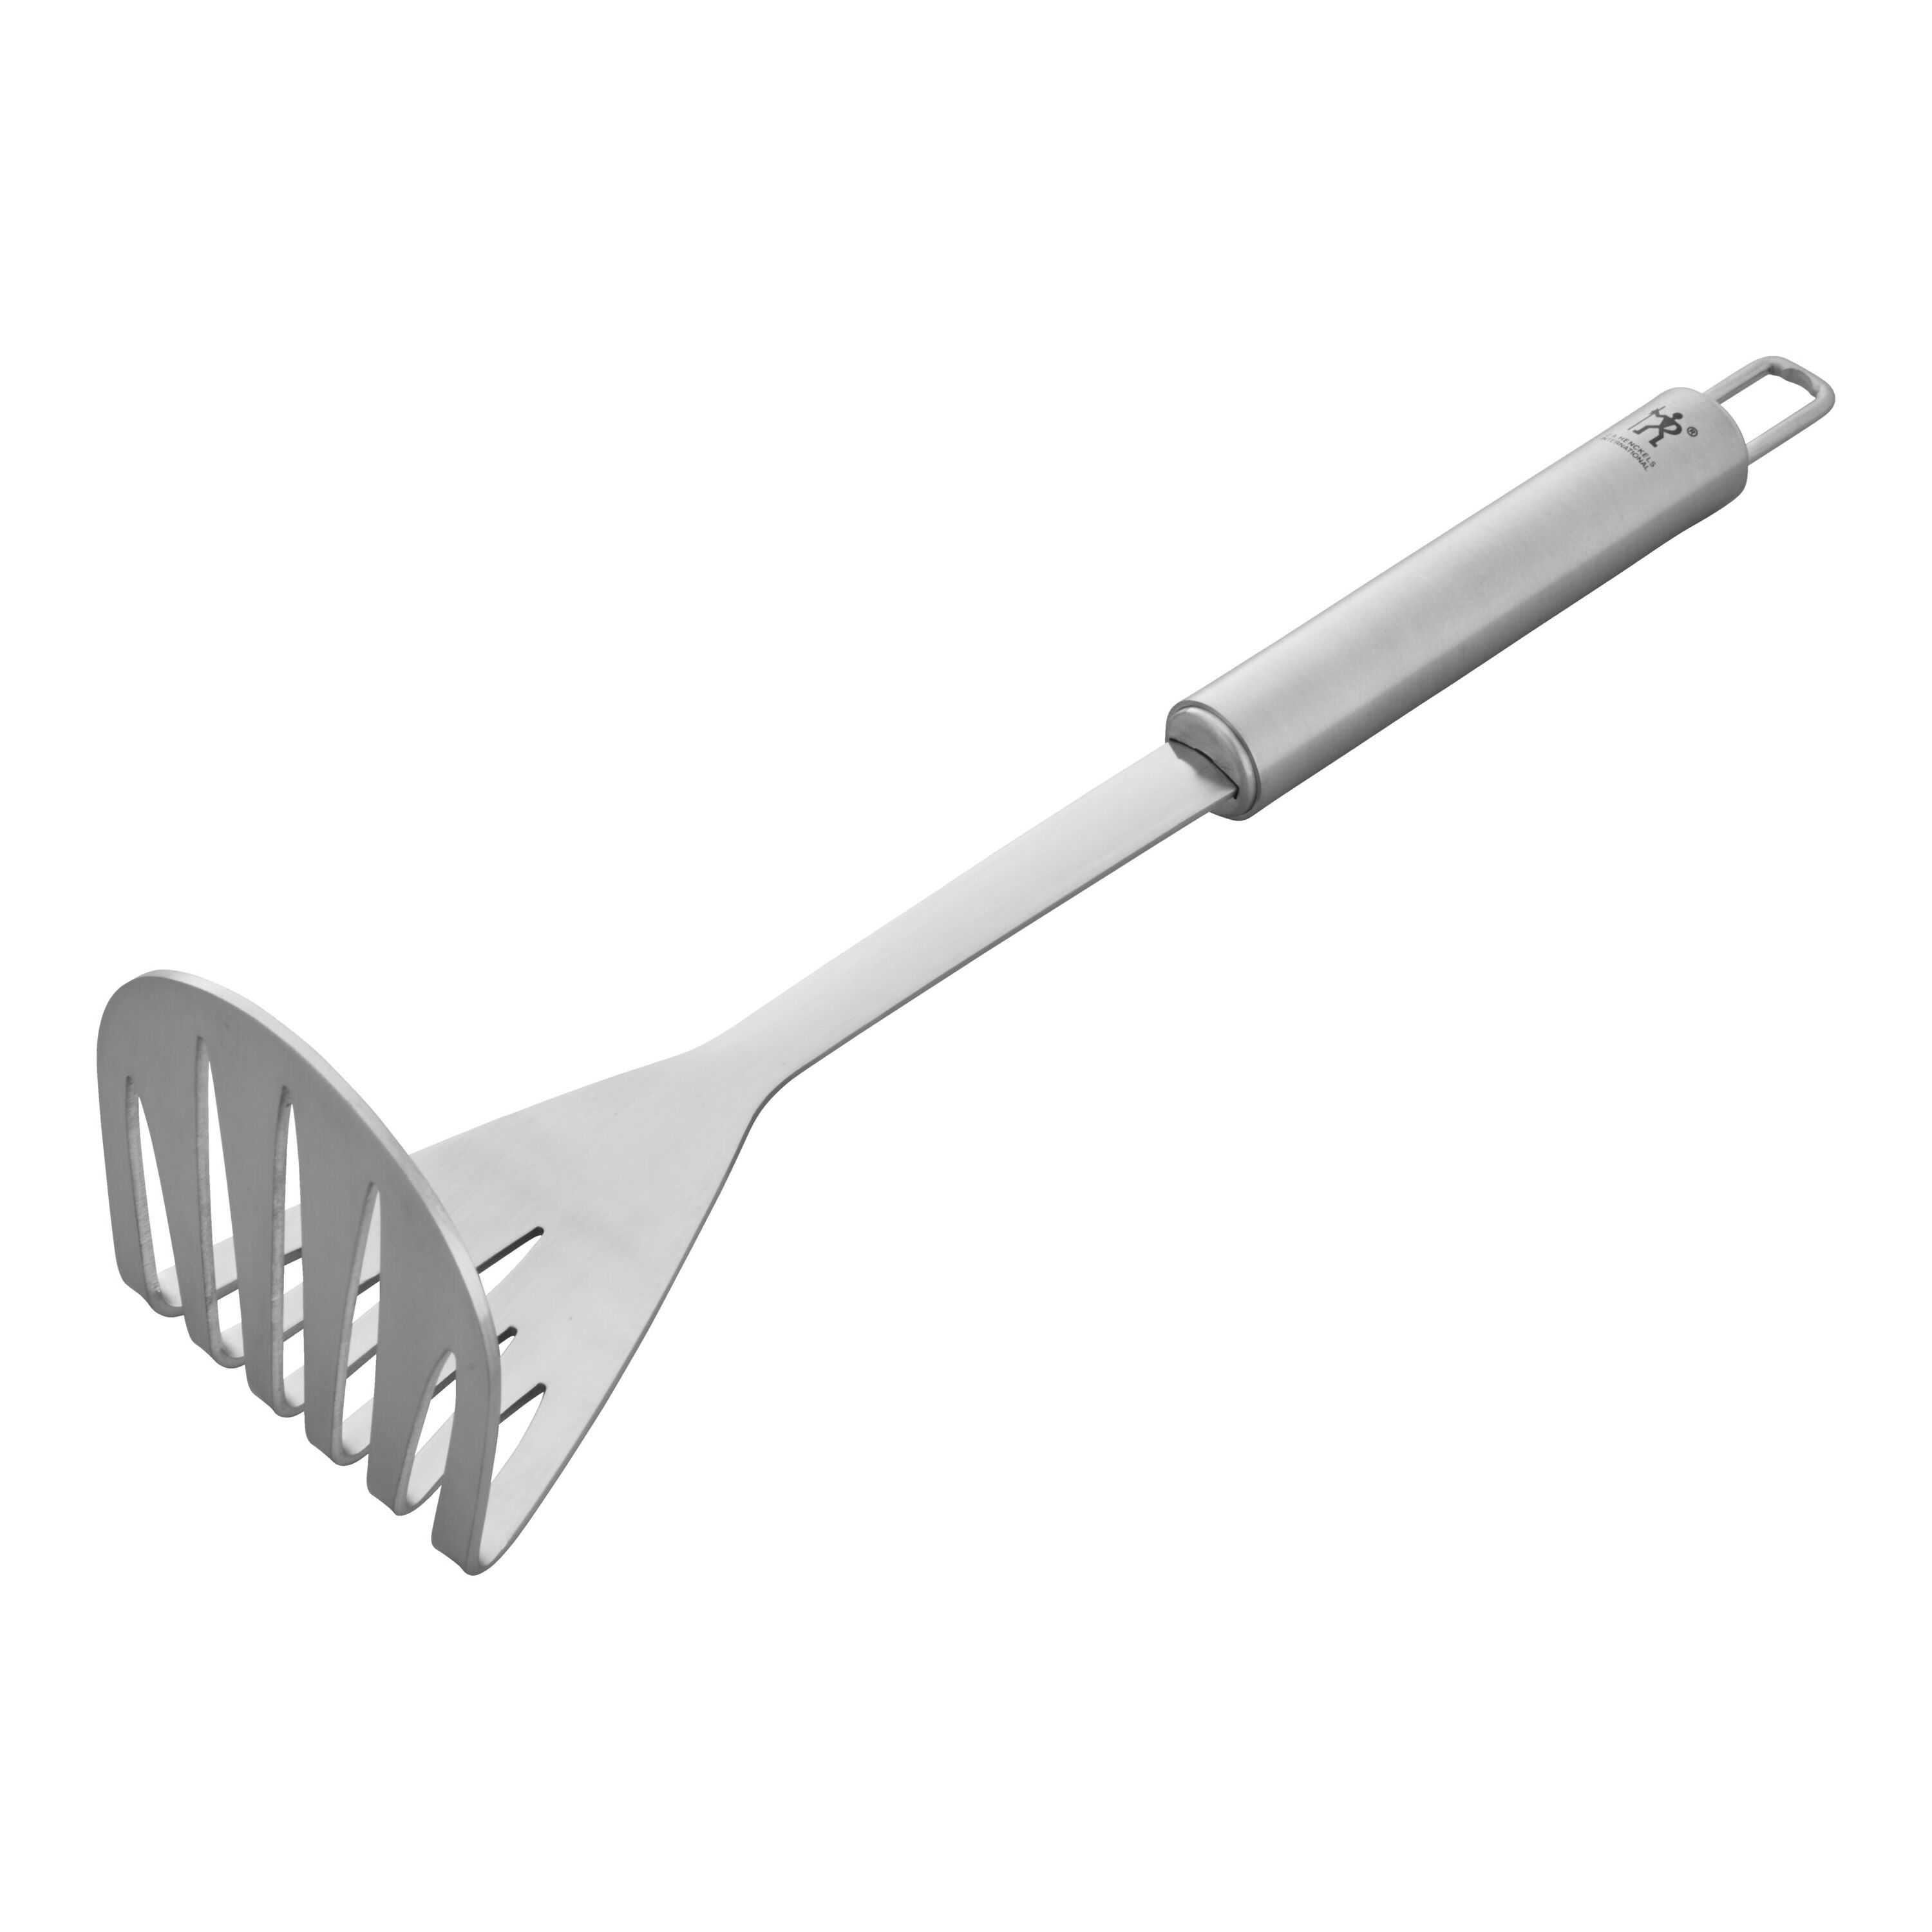 Henckels Cooking Tools 18/10 Stainless Steel, Potato masher